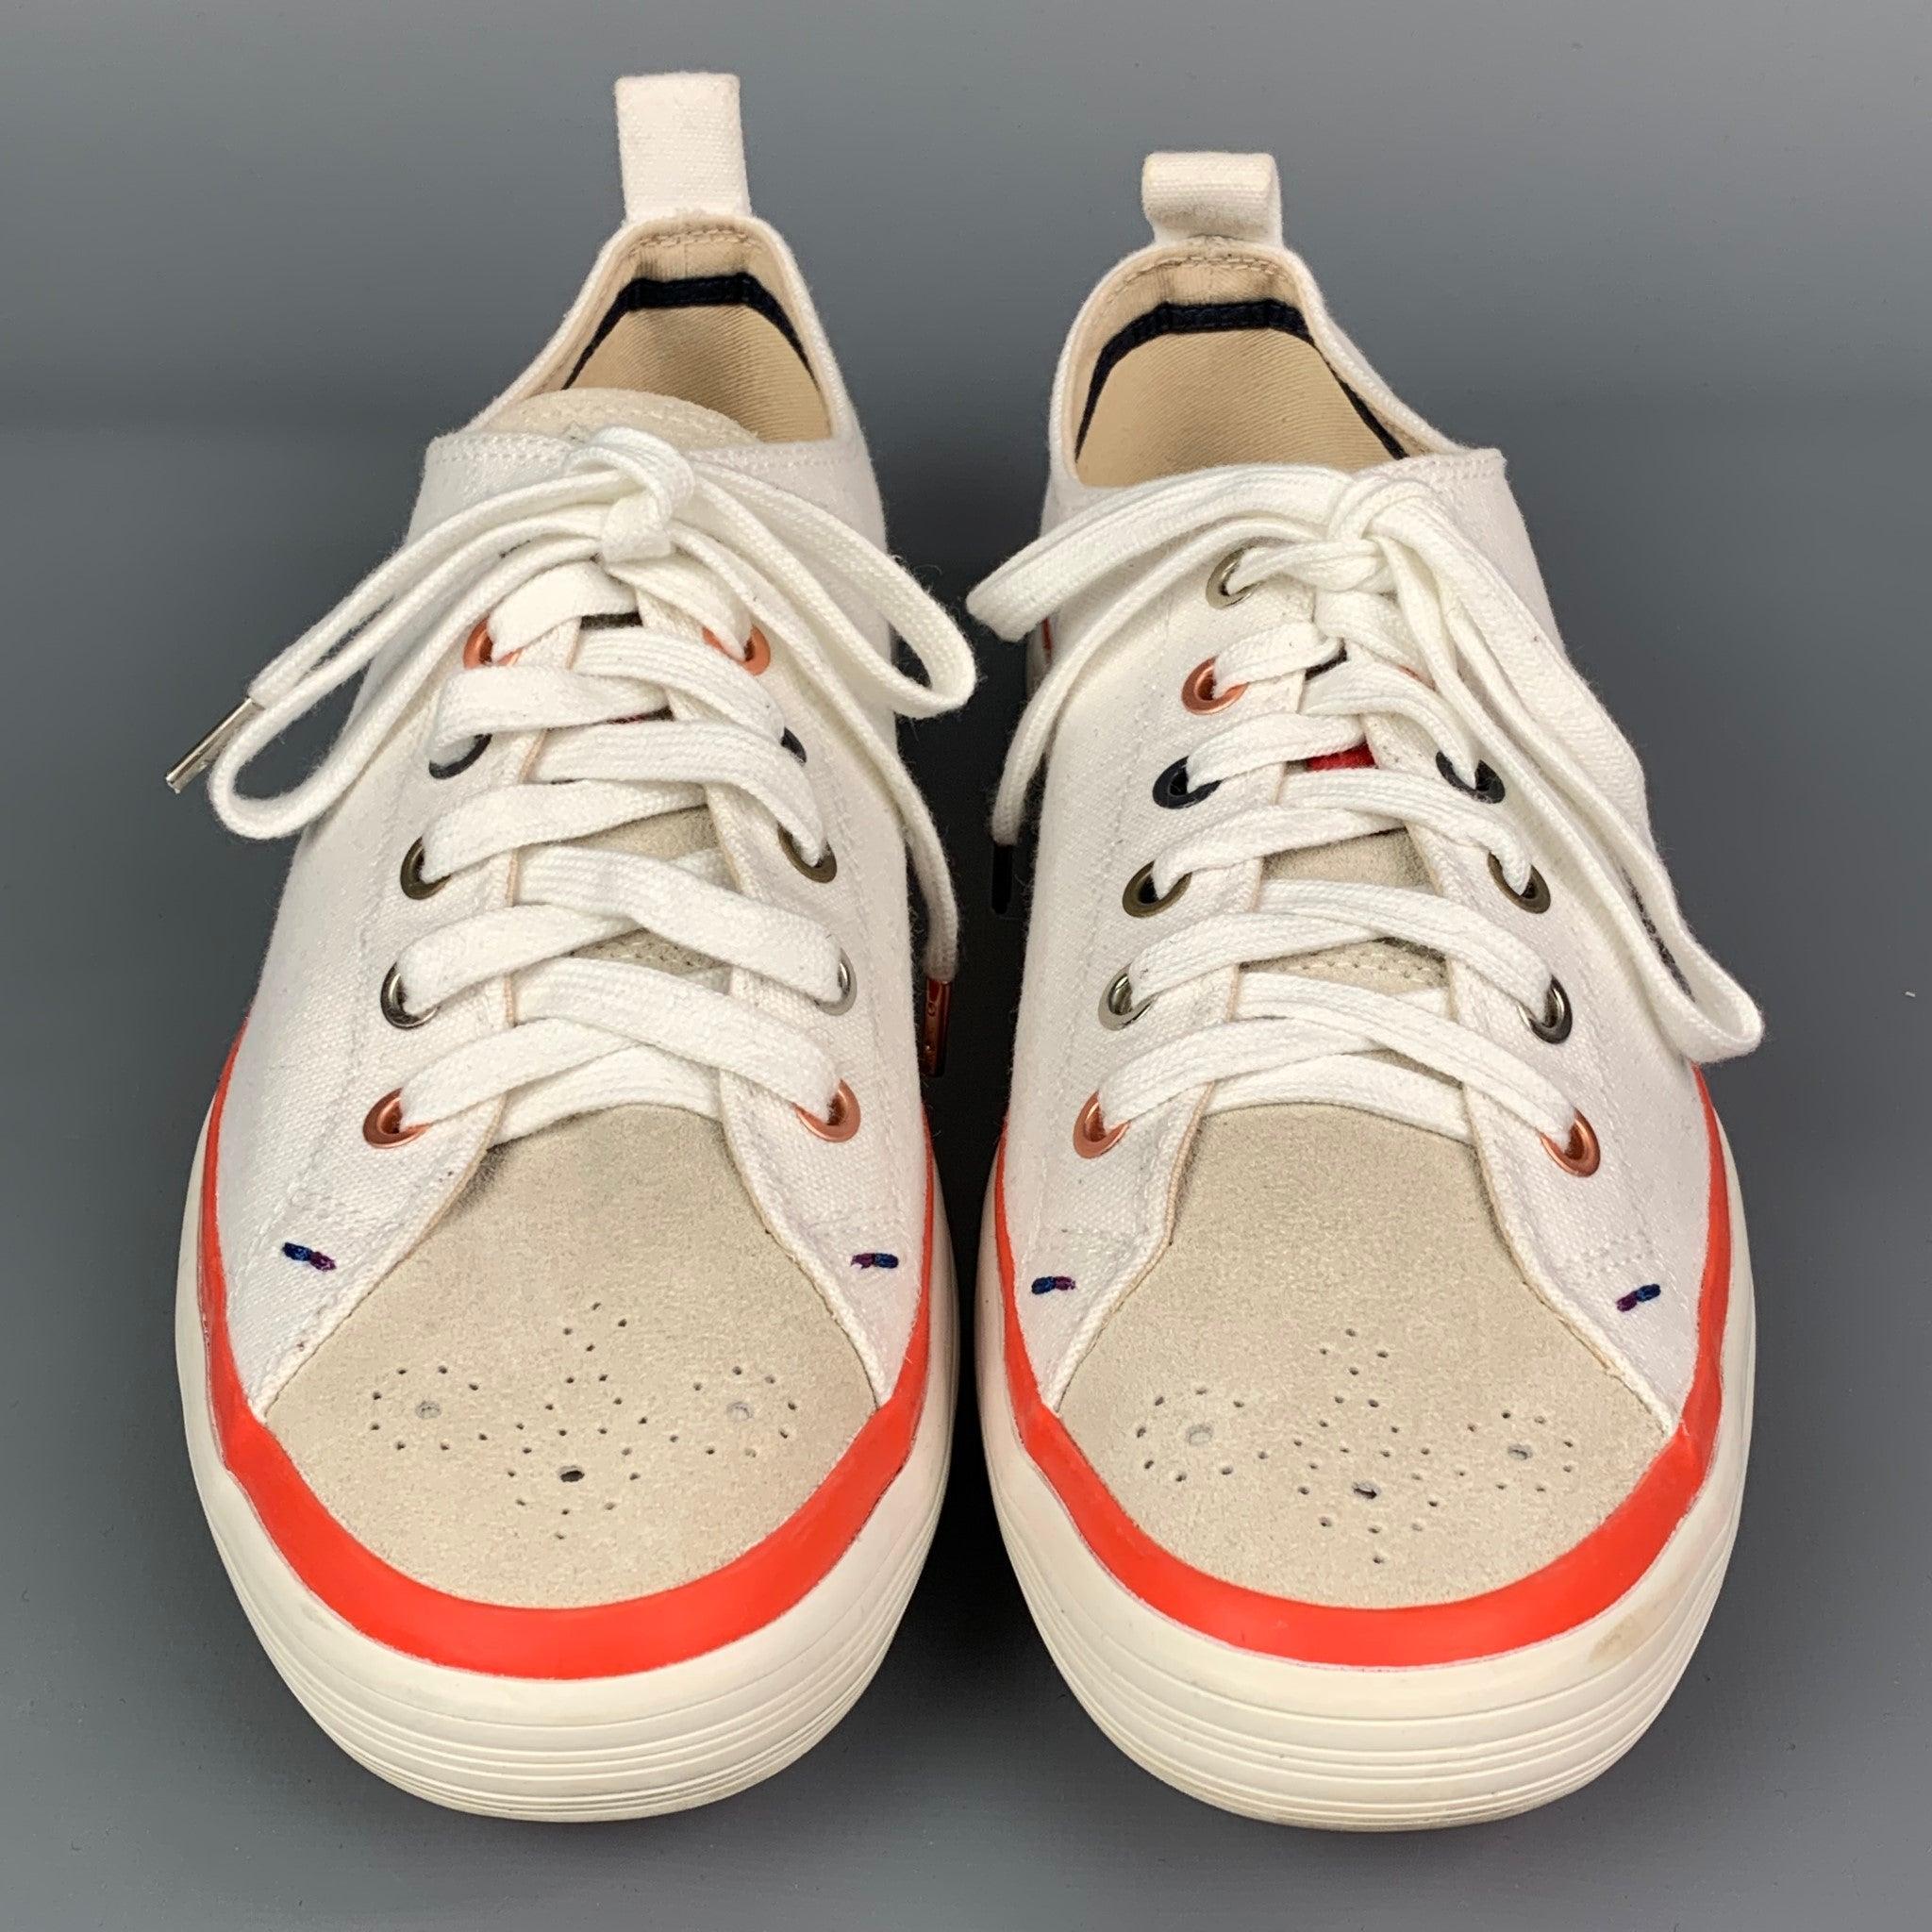 Men's PAUL SMITH Size 7 White Canvas Lace Up Bernard Trainer Sneakers For Sale